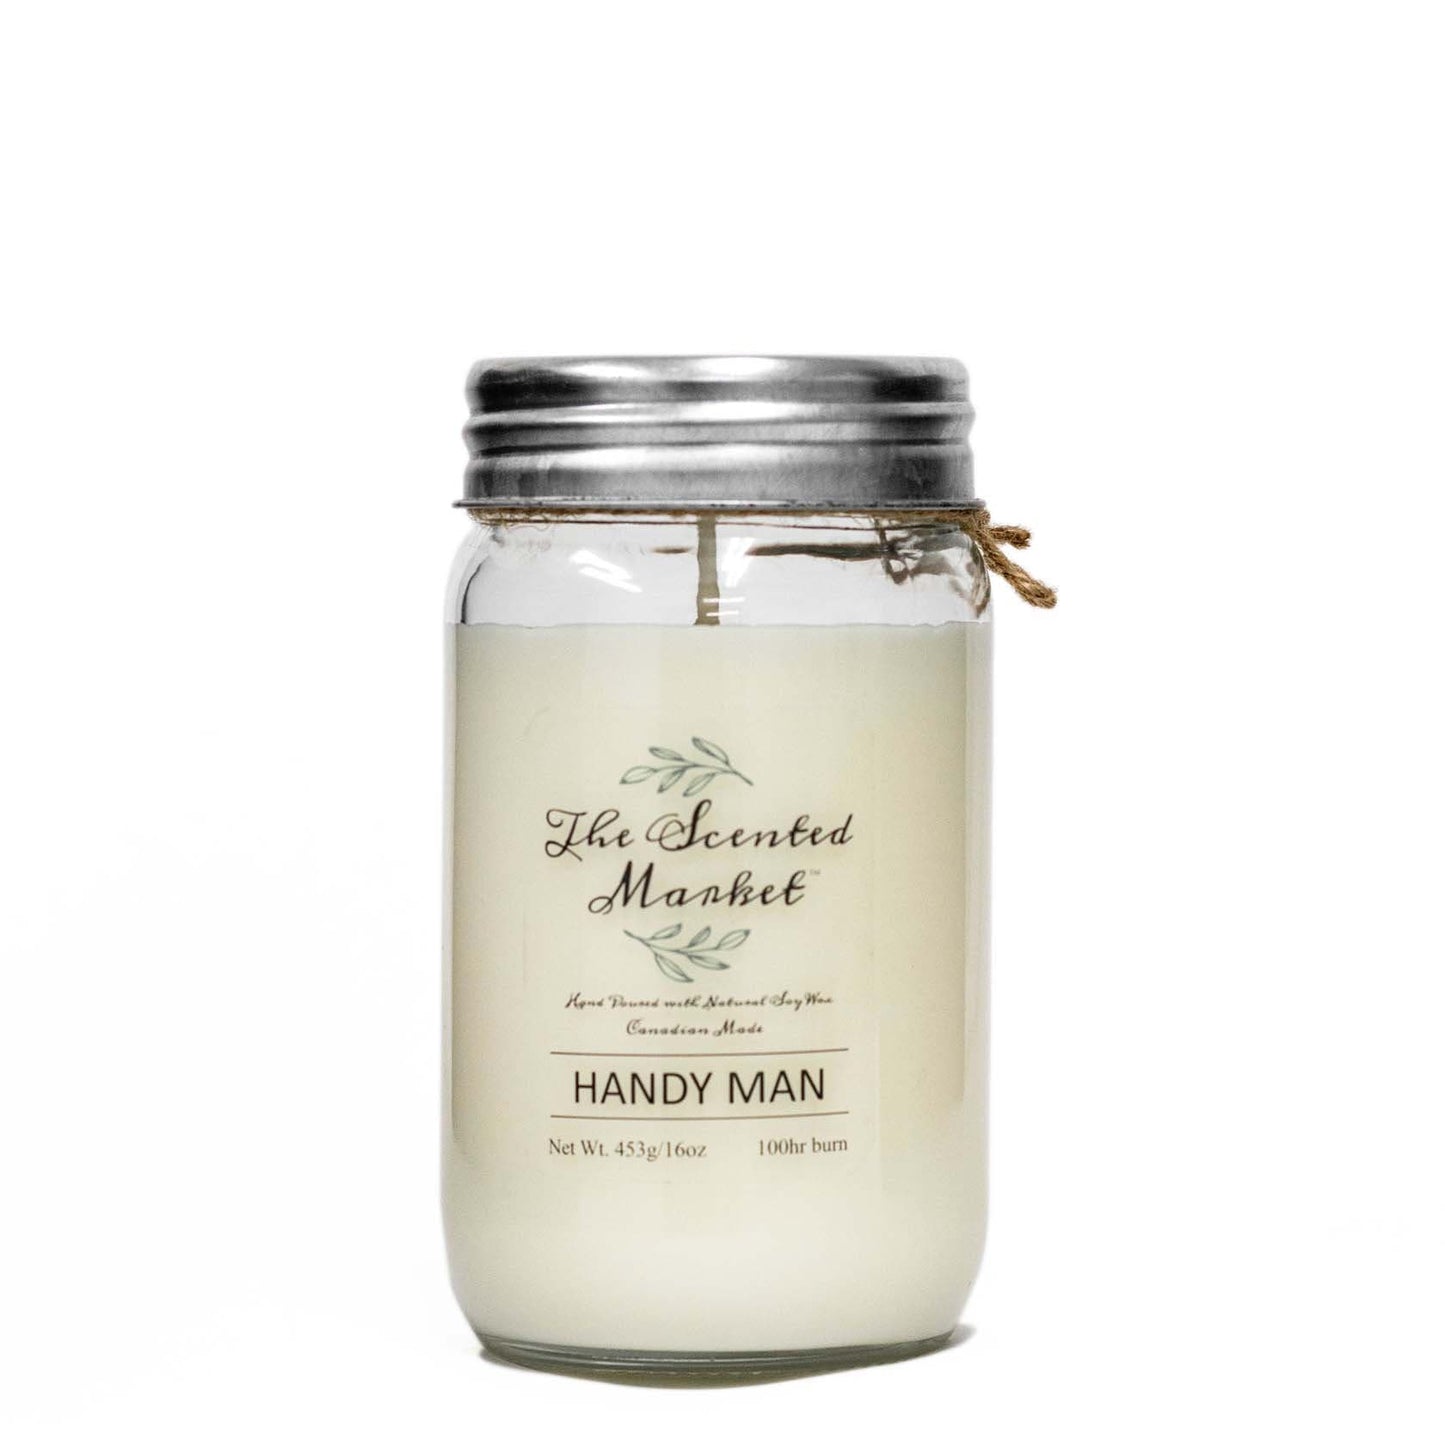 Handyman Scented Soy Candle in 16 oz